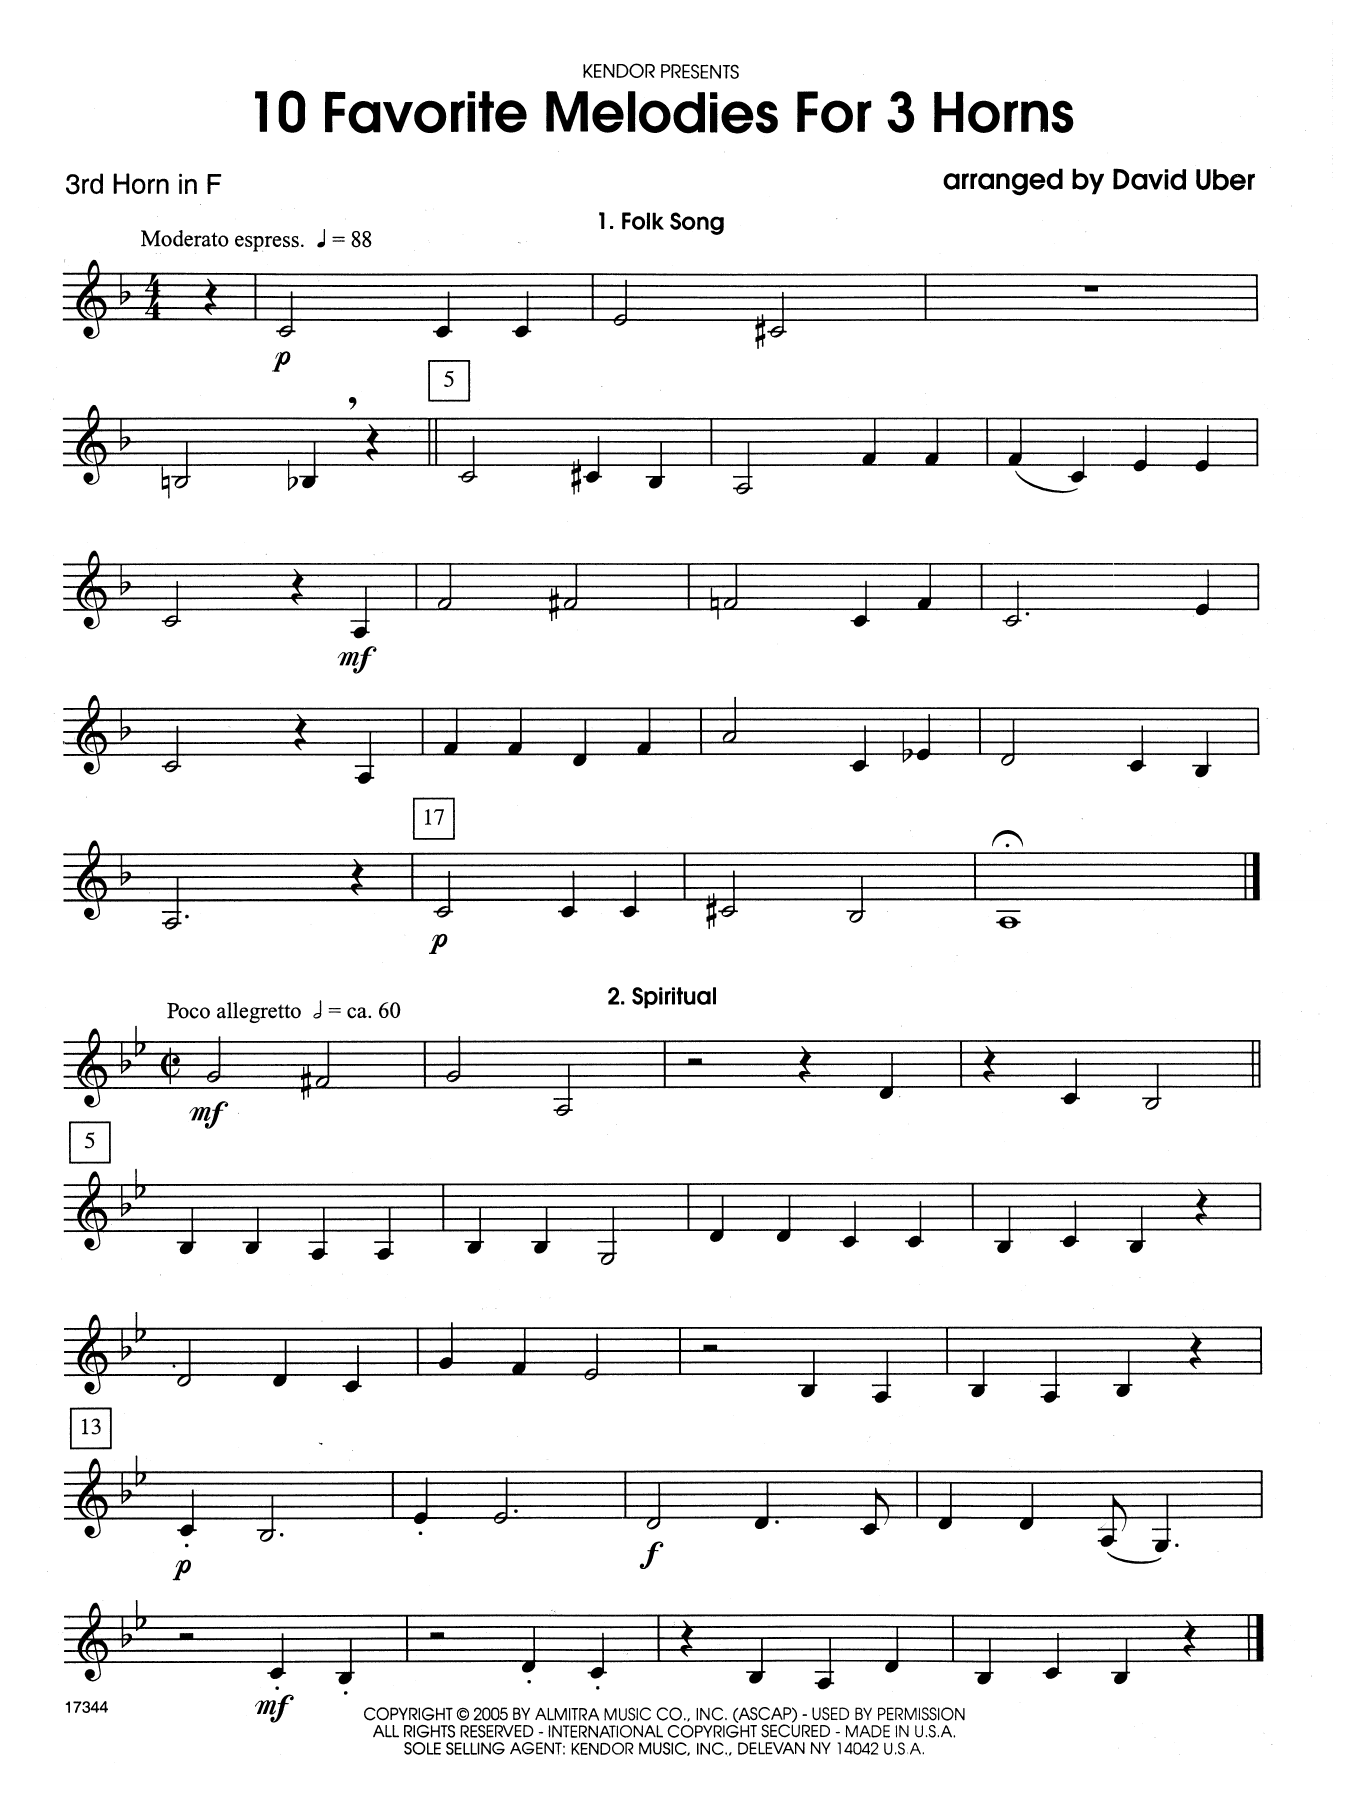 David Uber 10 Favorite Melodies For 3 Horns - 3rd Horn in F sheet music notes and chords. Download Printable PDF.